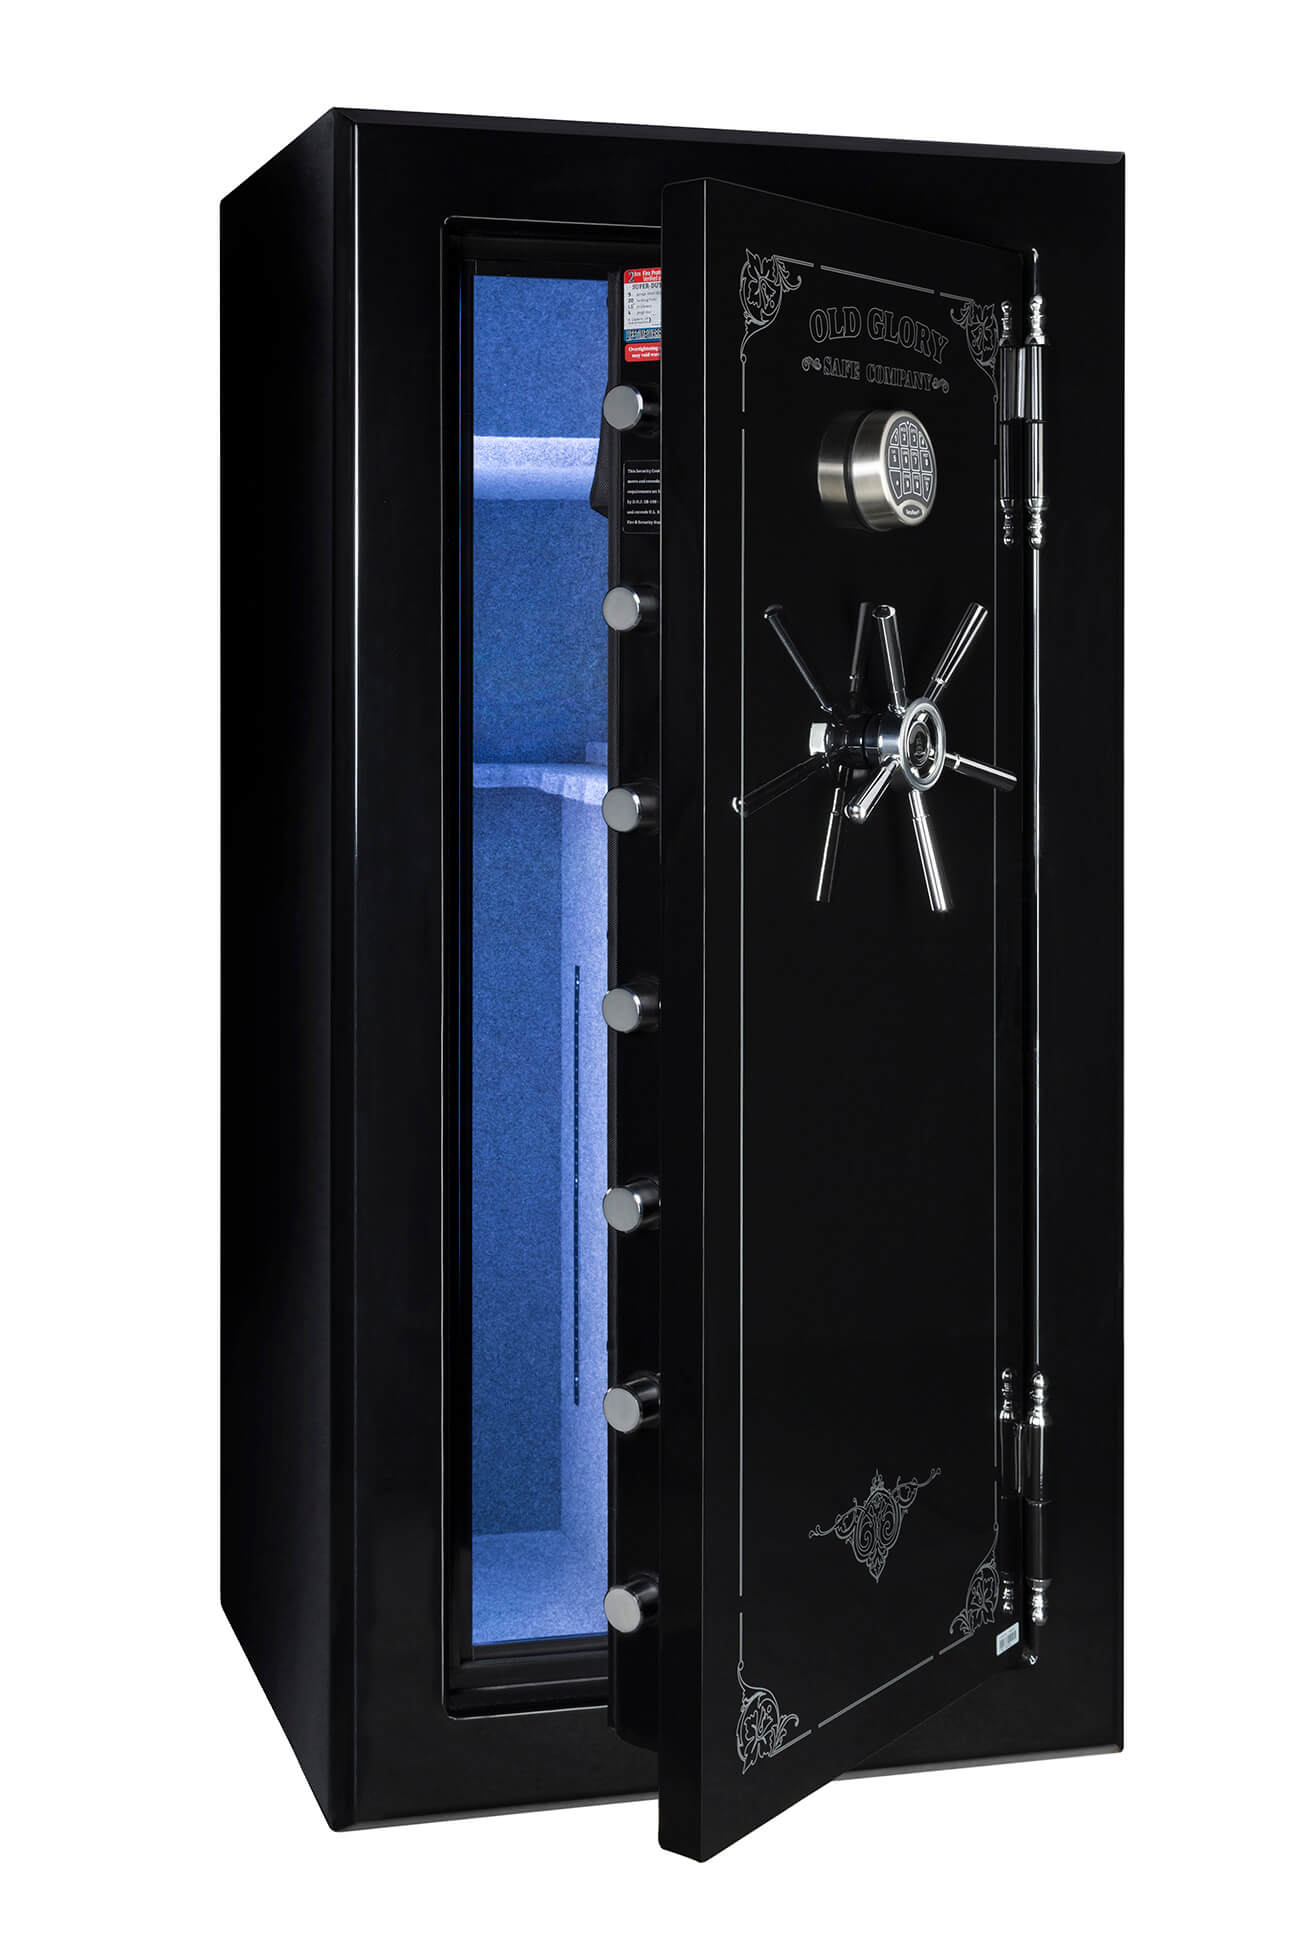 60 inch tall by 30 inch wide Old Glory LE Legend gun safe unlocked in gloss black with blue LED lights